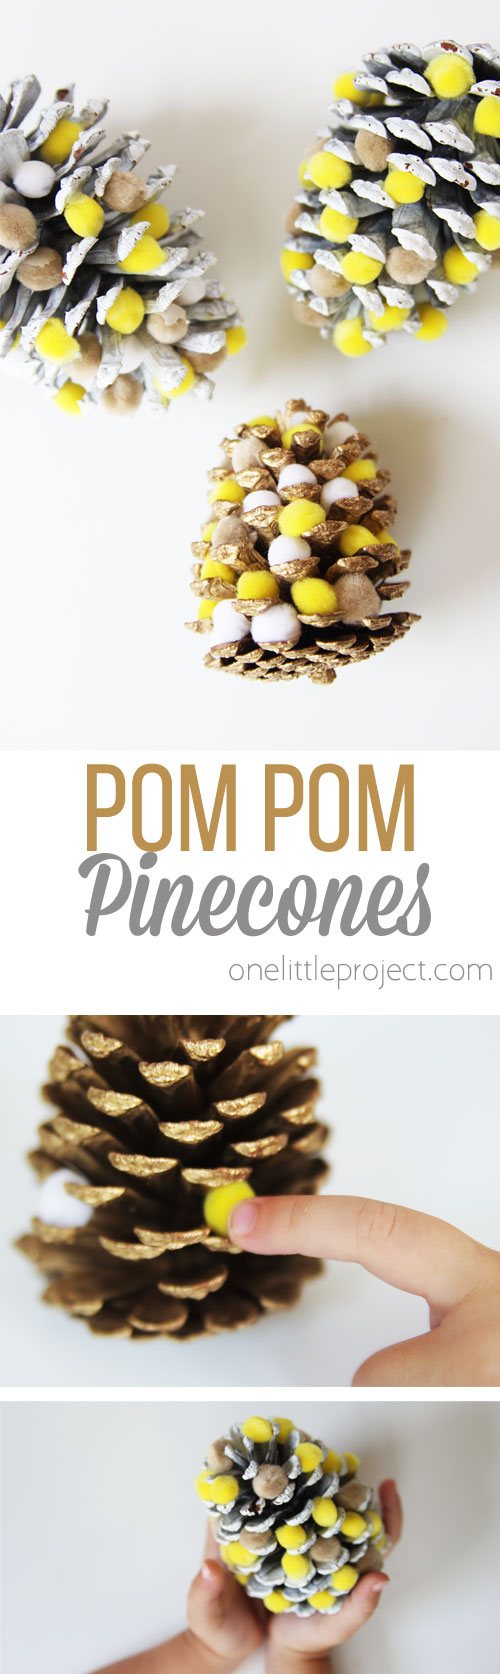 These pom pom pinecones are the perfect fall craft for preschoolers to make and they couldn't be cuter!